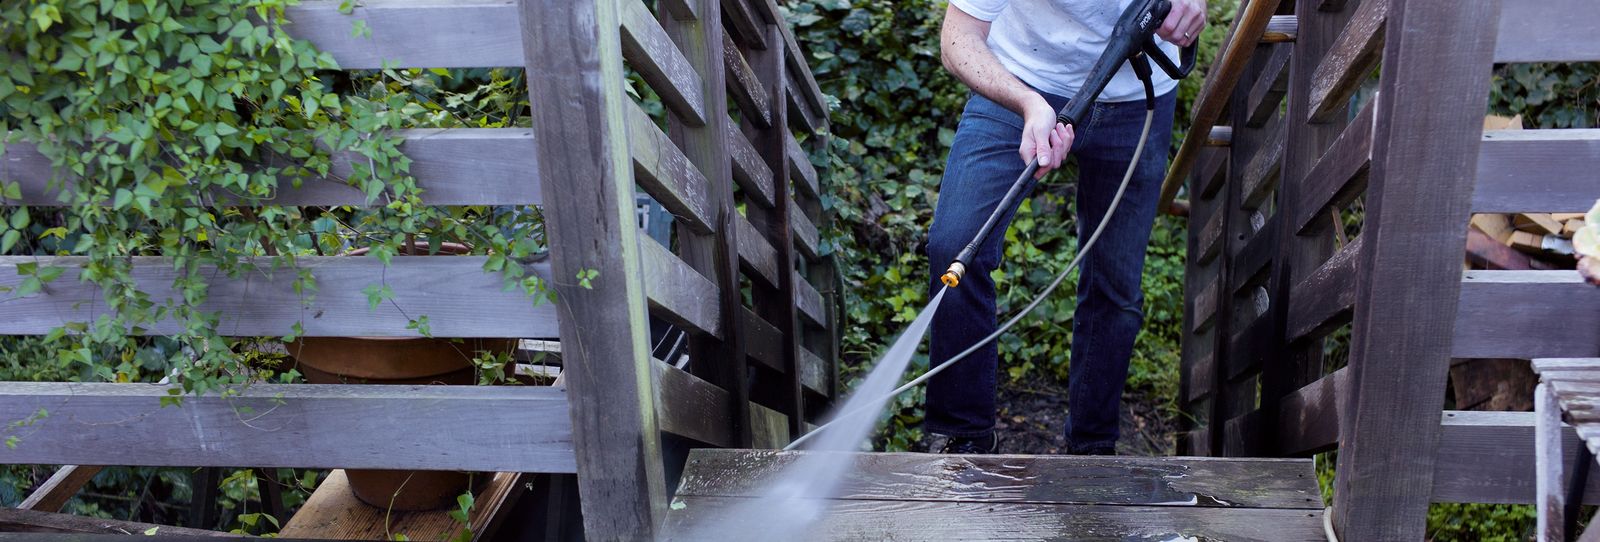 The 10 Best Pressure Washing Services Near Me (with Free ...